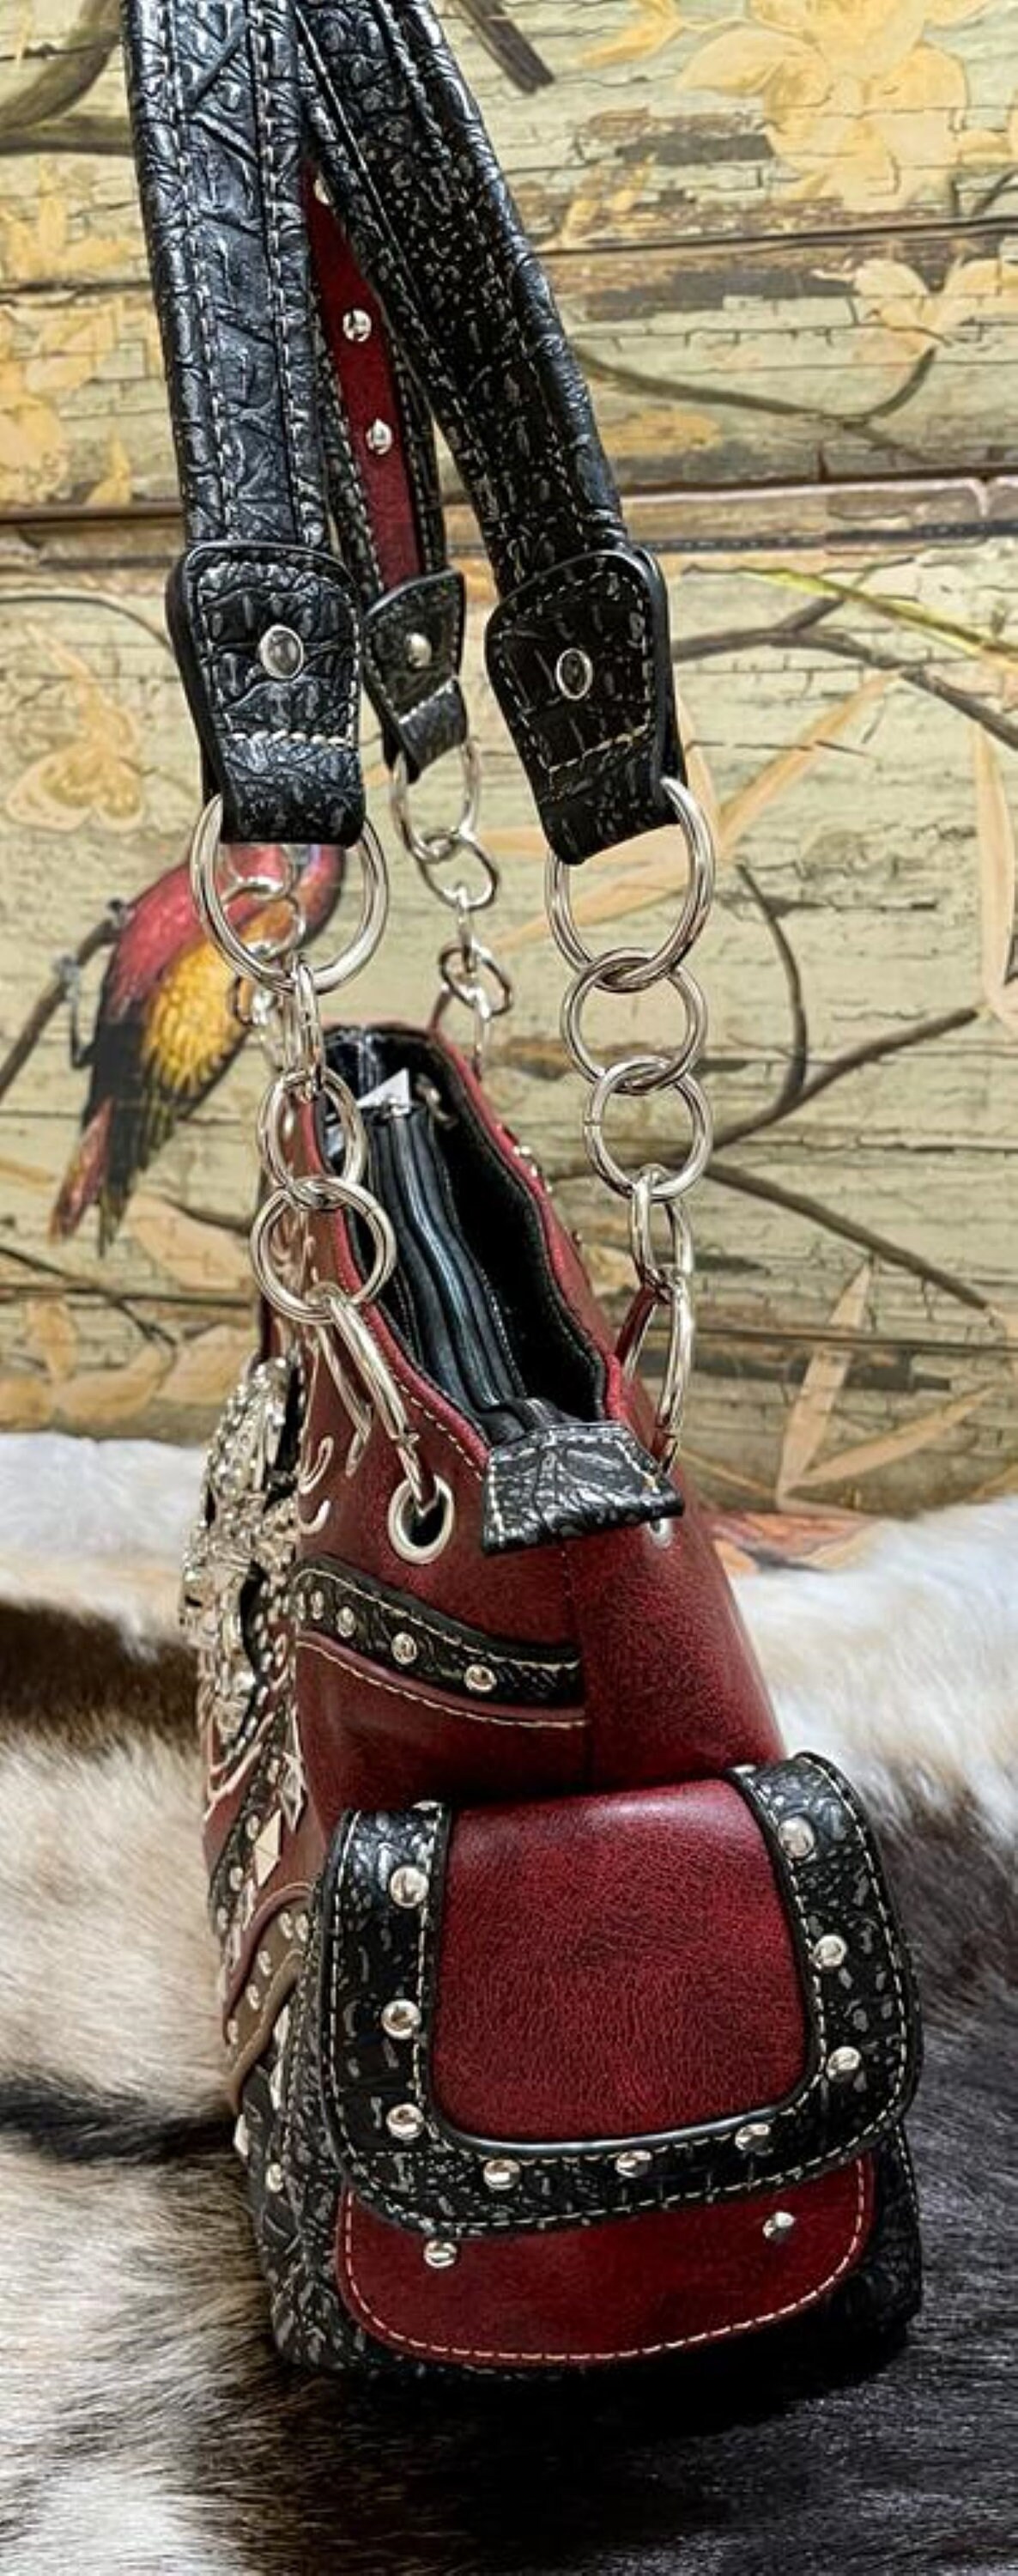 Texas West Rhinestone Embroidered Metal Skull Leather Women's Handbag With  Matching Wallets in 7 Colors. - Walmart.com